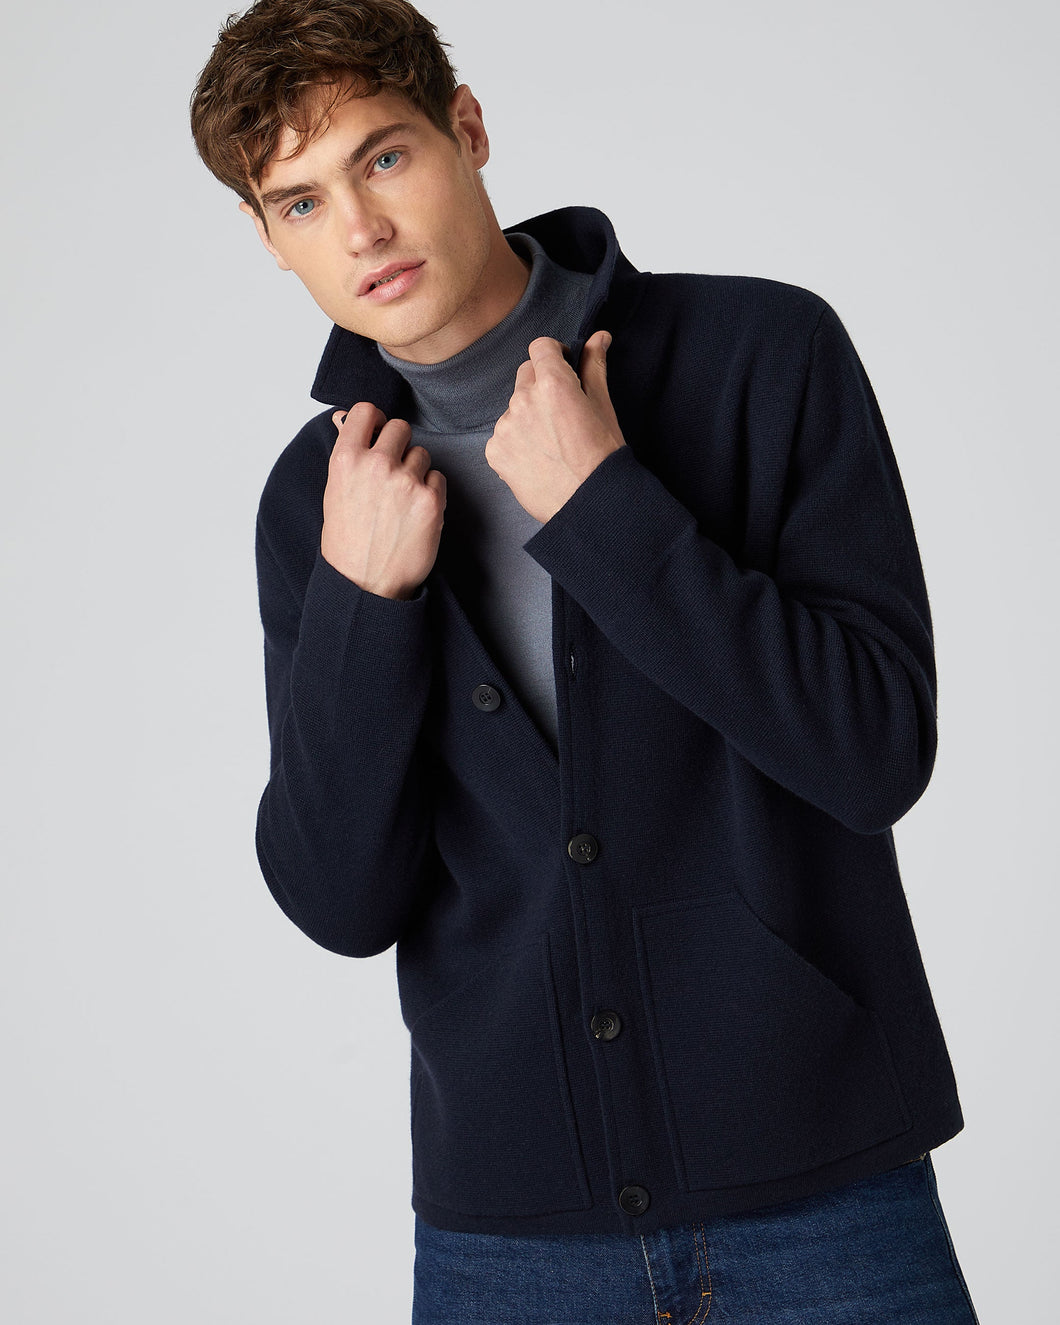 N.Peal Men's Collared Milano Cashmere Jacket Navy Blue